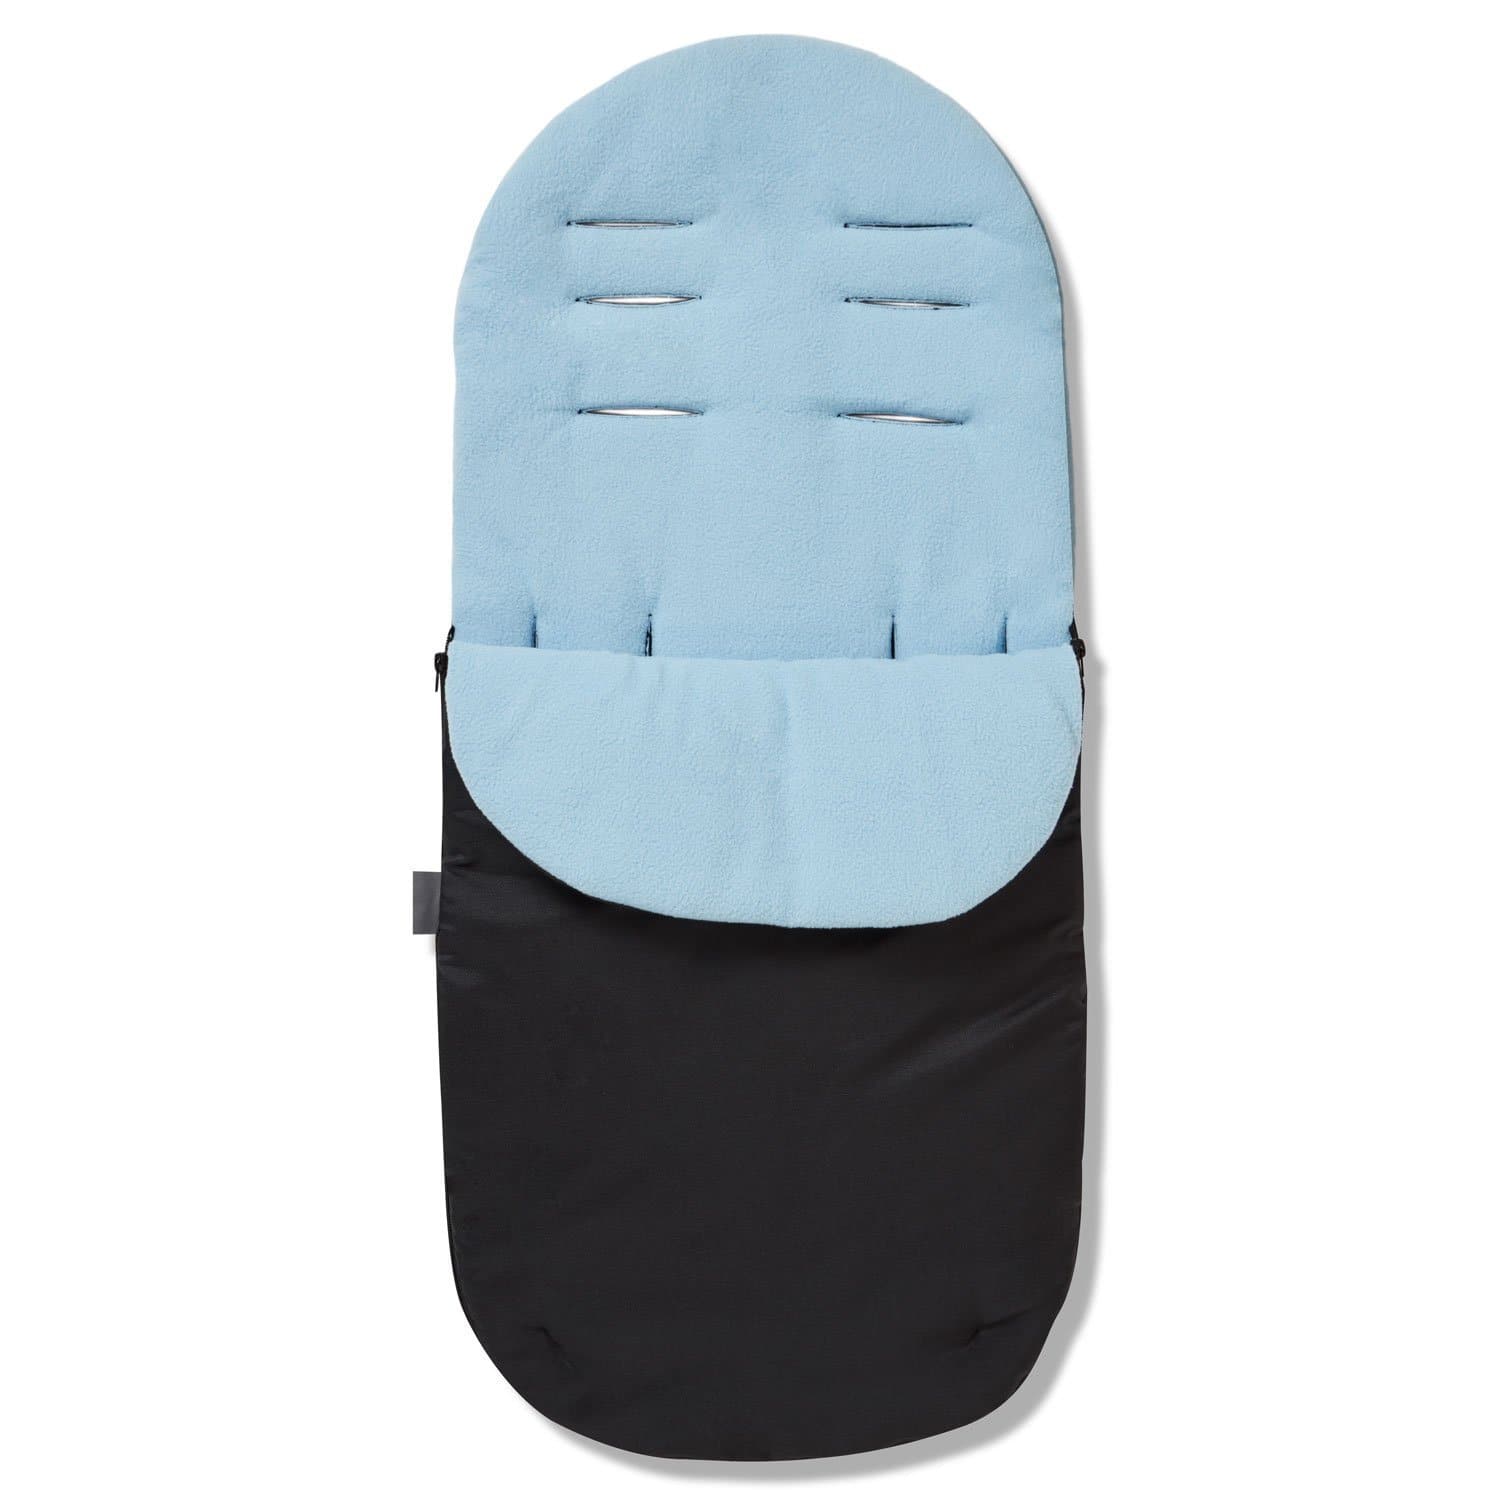 Footmuff / Cosy Toes Compatible with Quax - Light Blue / Fits All Models | For Your Little One